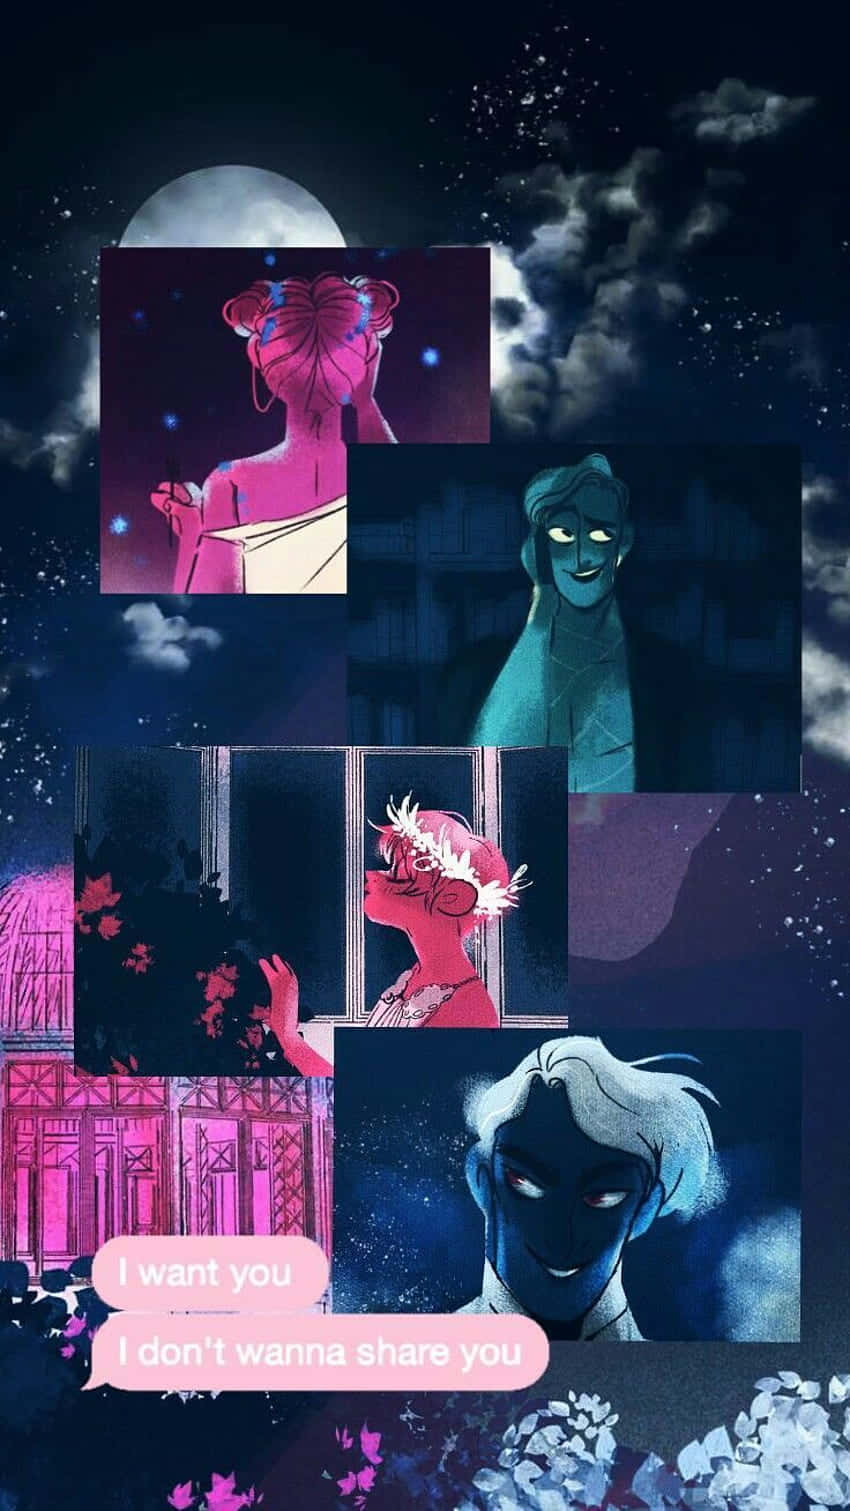 Hades and Persephone's star-crossed romance unfolds in the comic webtoon Lore Olympus. Wallpaper